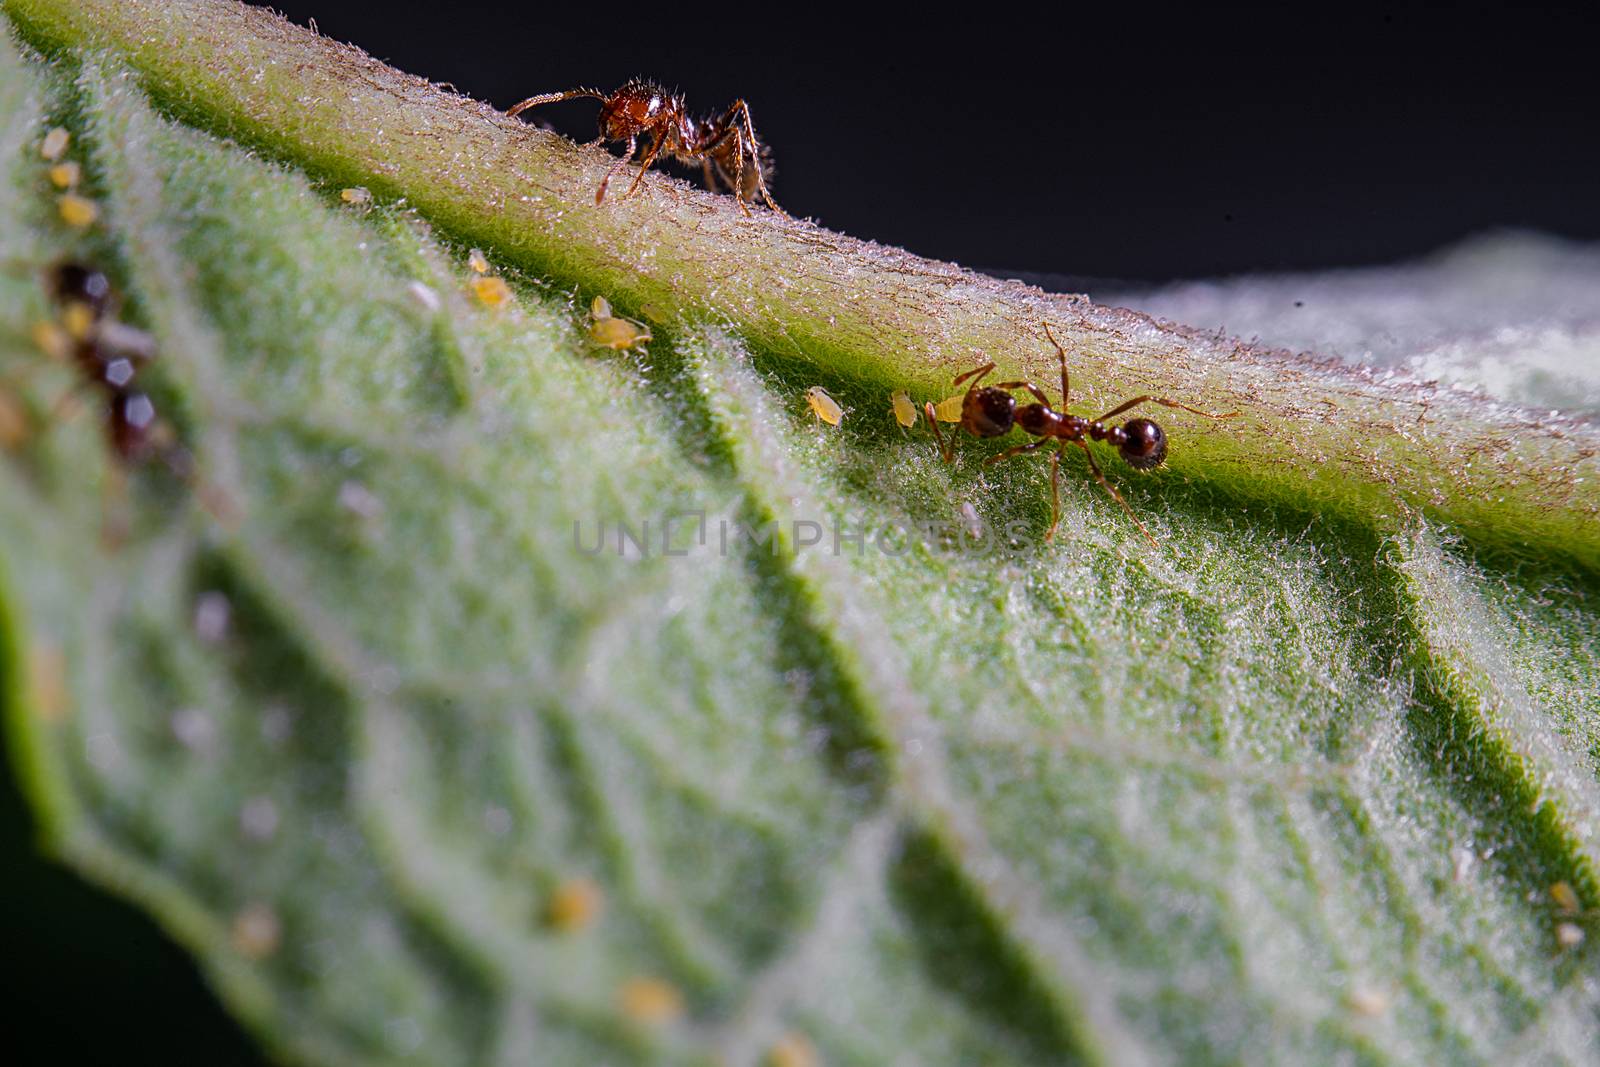 Ants and aphids by jrivalta